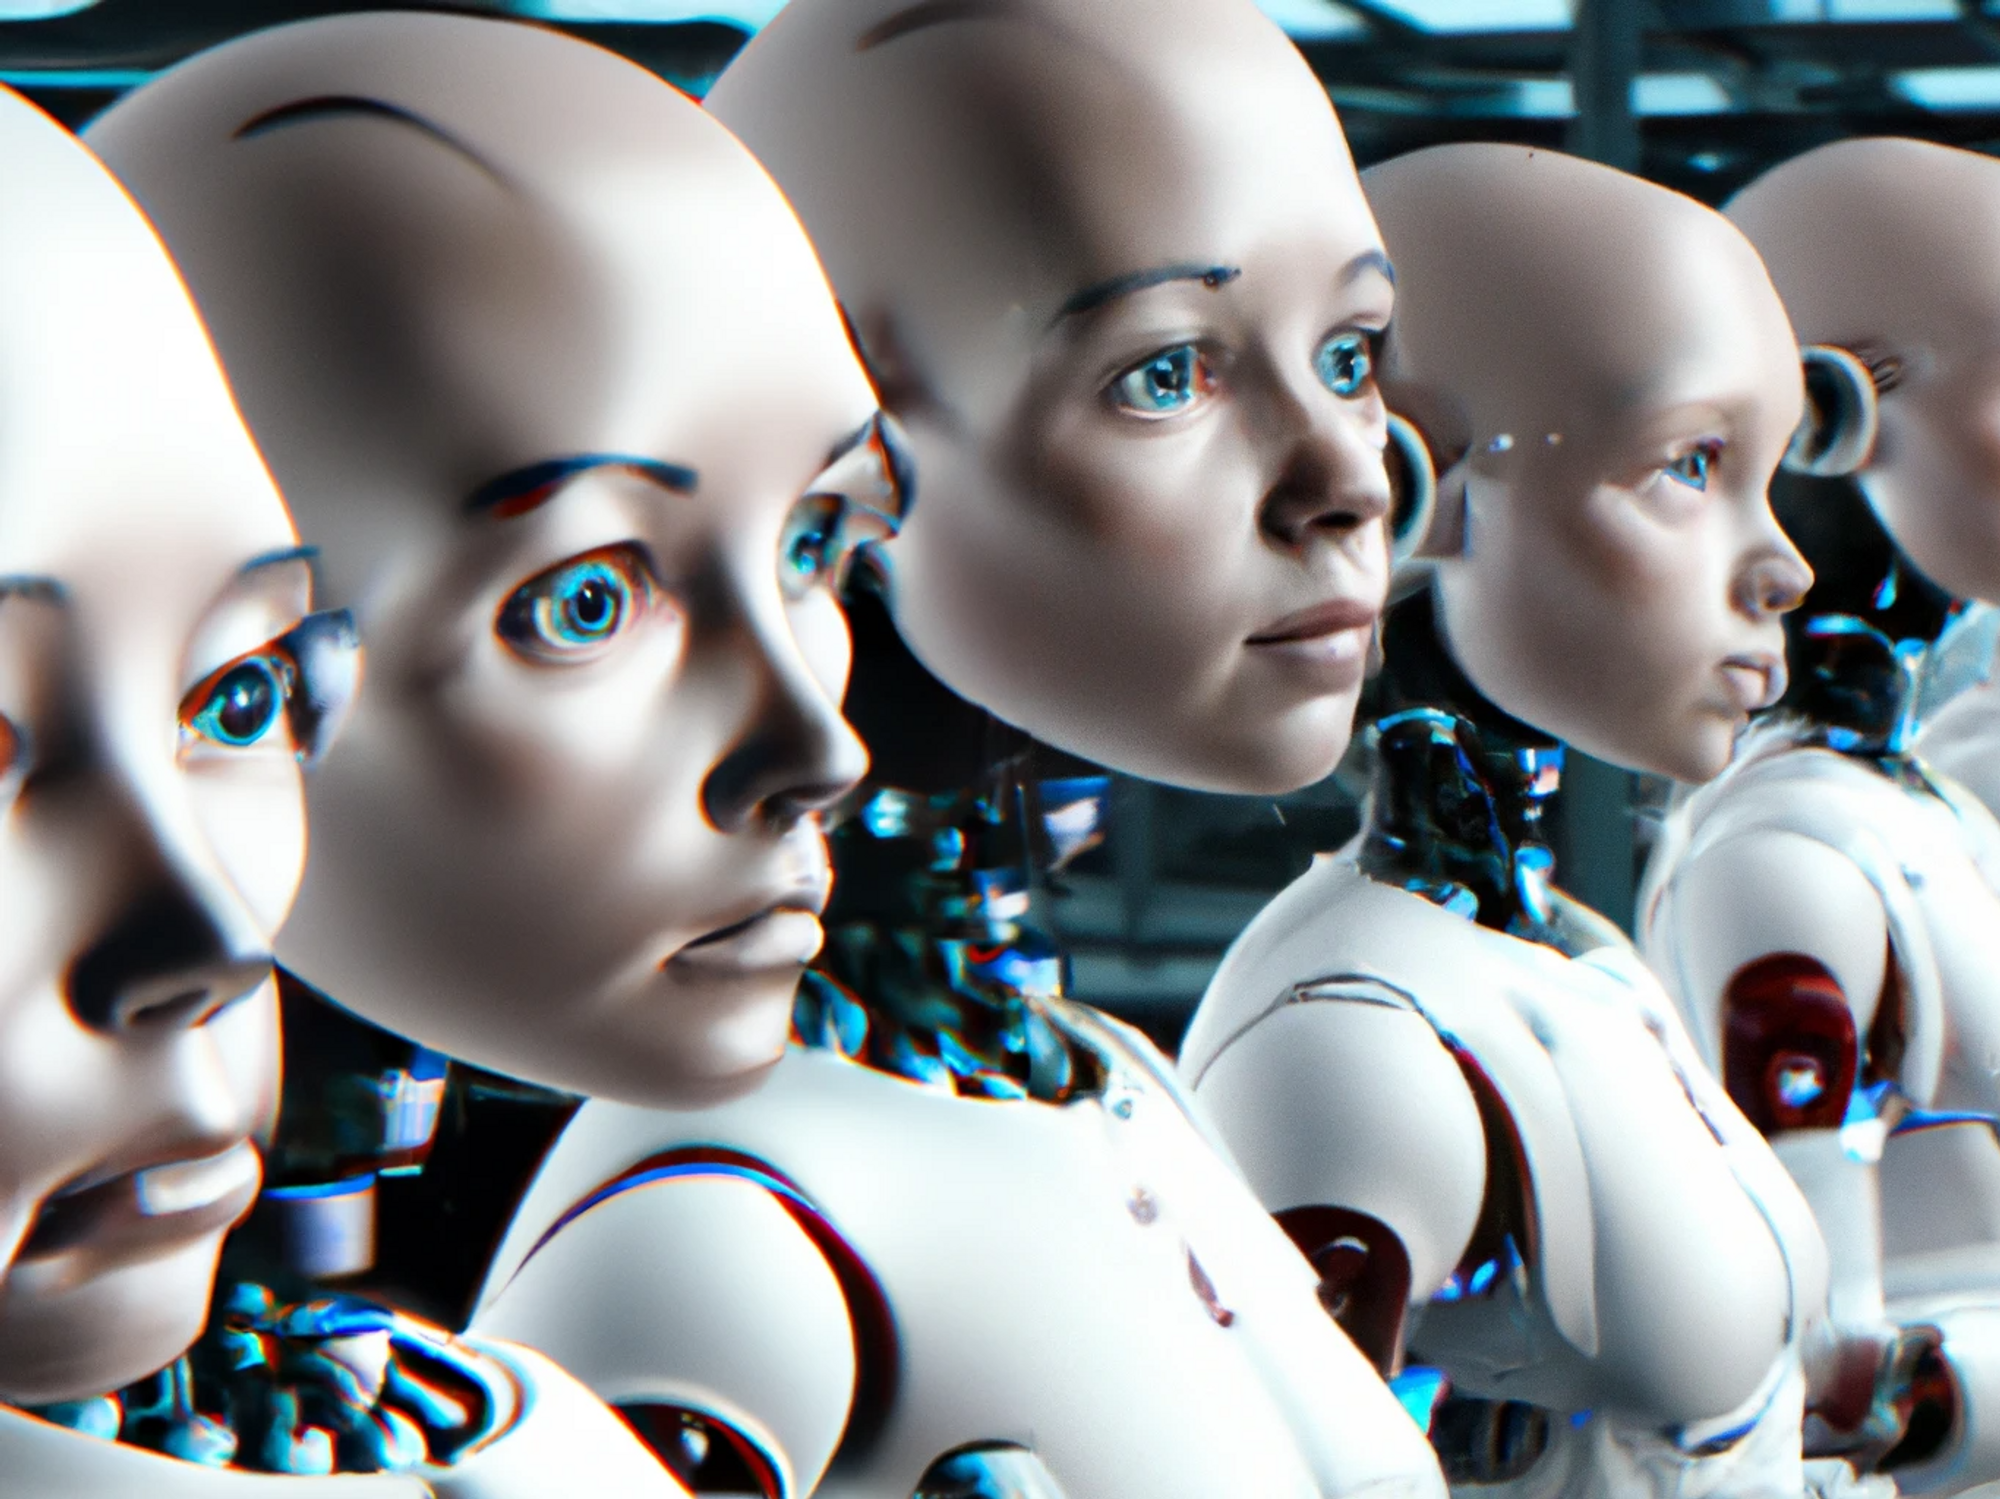 Do We Really NEED Humanoid Robots? Or Do We Just Want Them Really Bad?